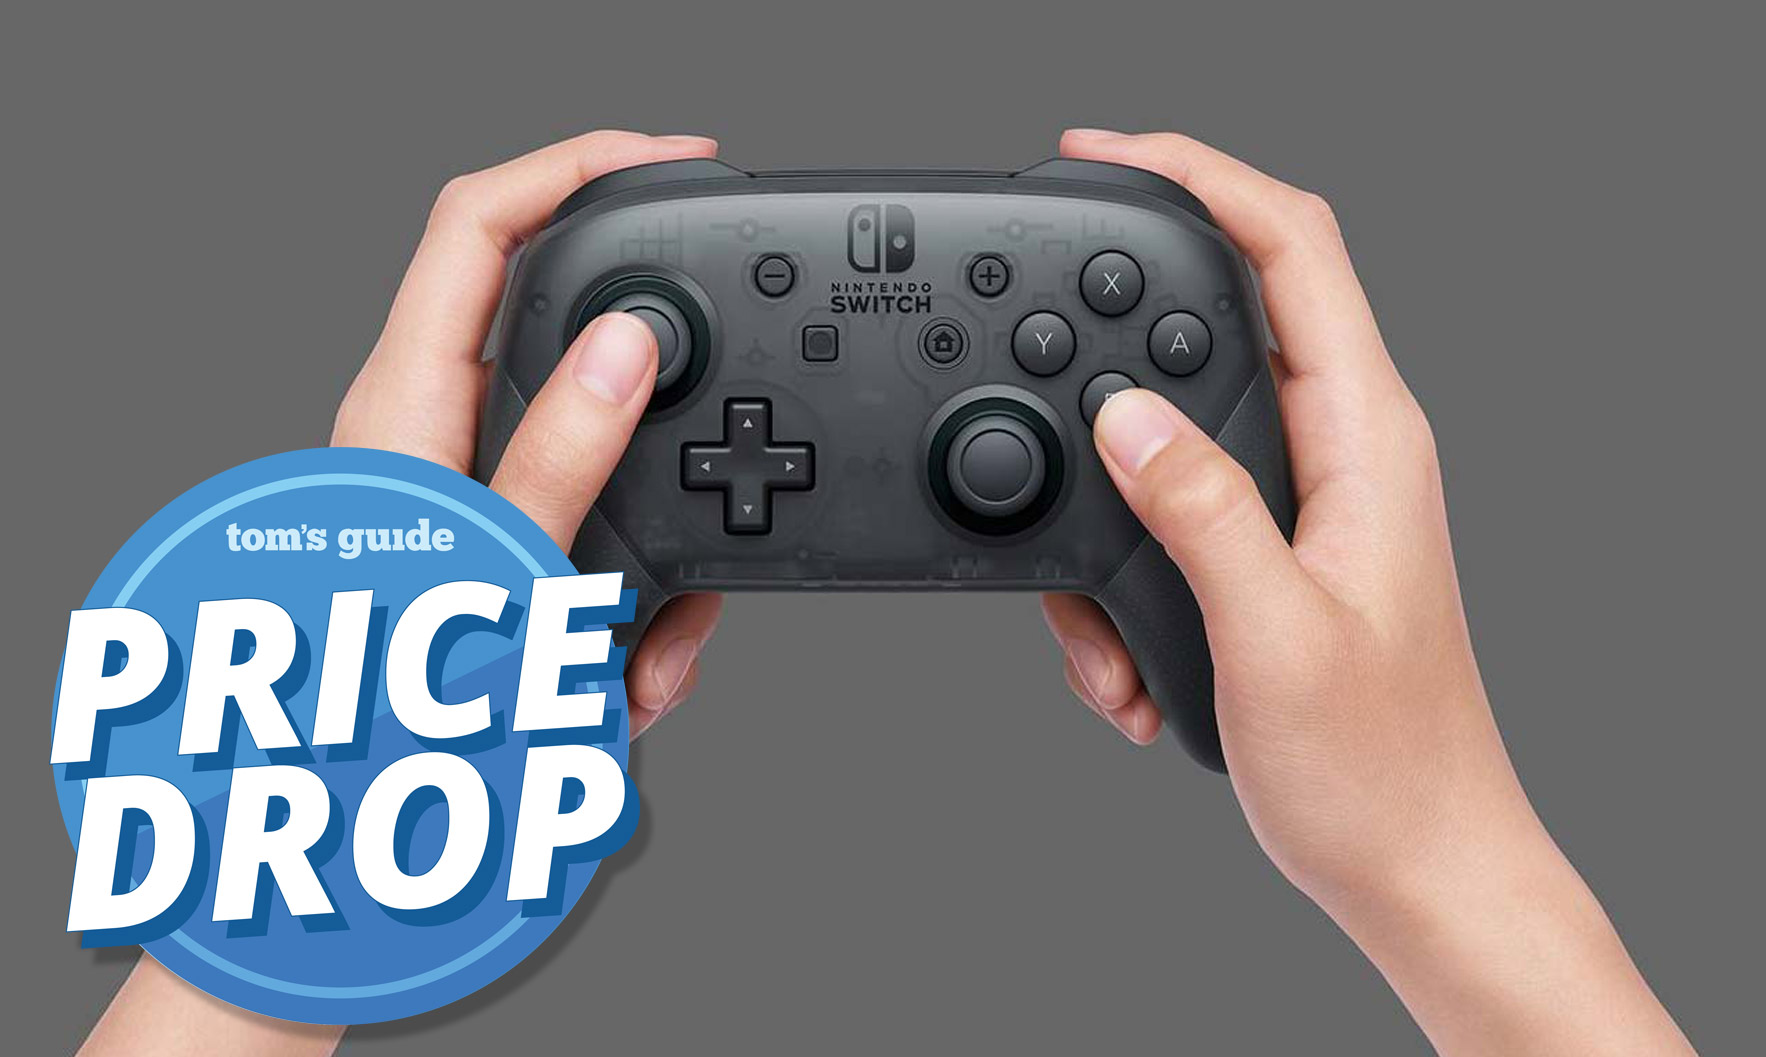 switch pro controller on sale